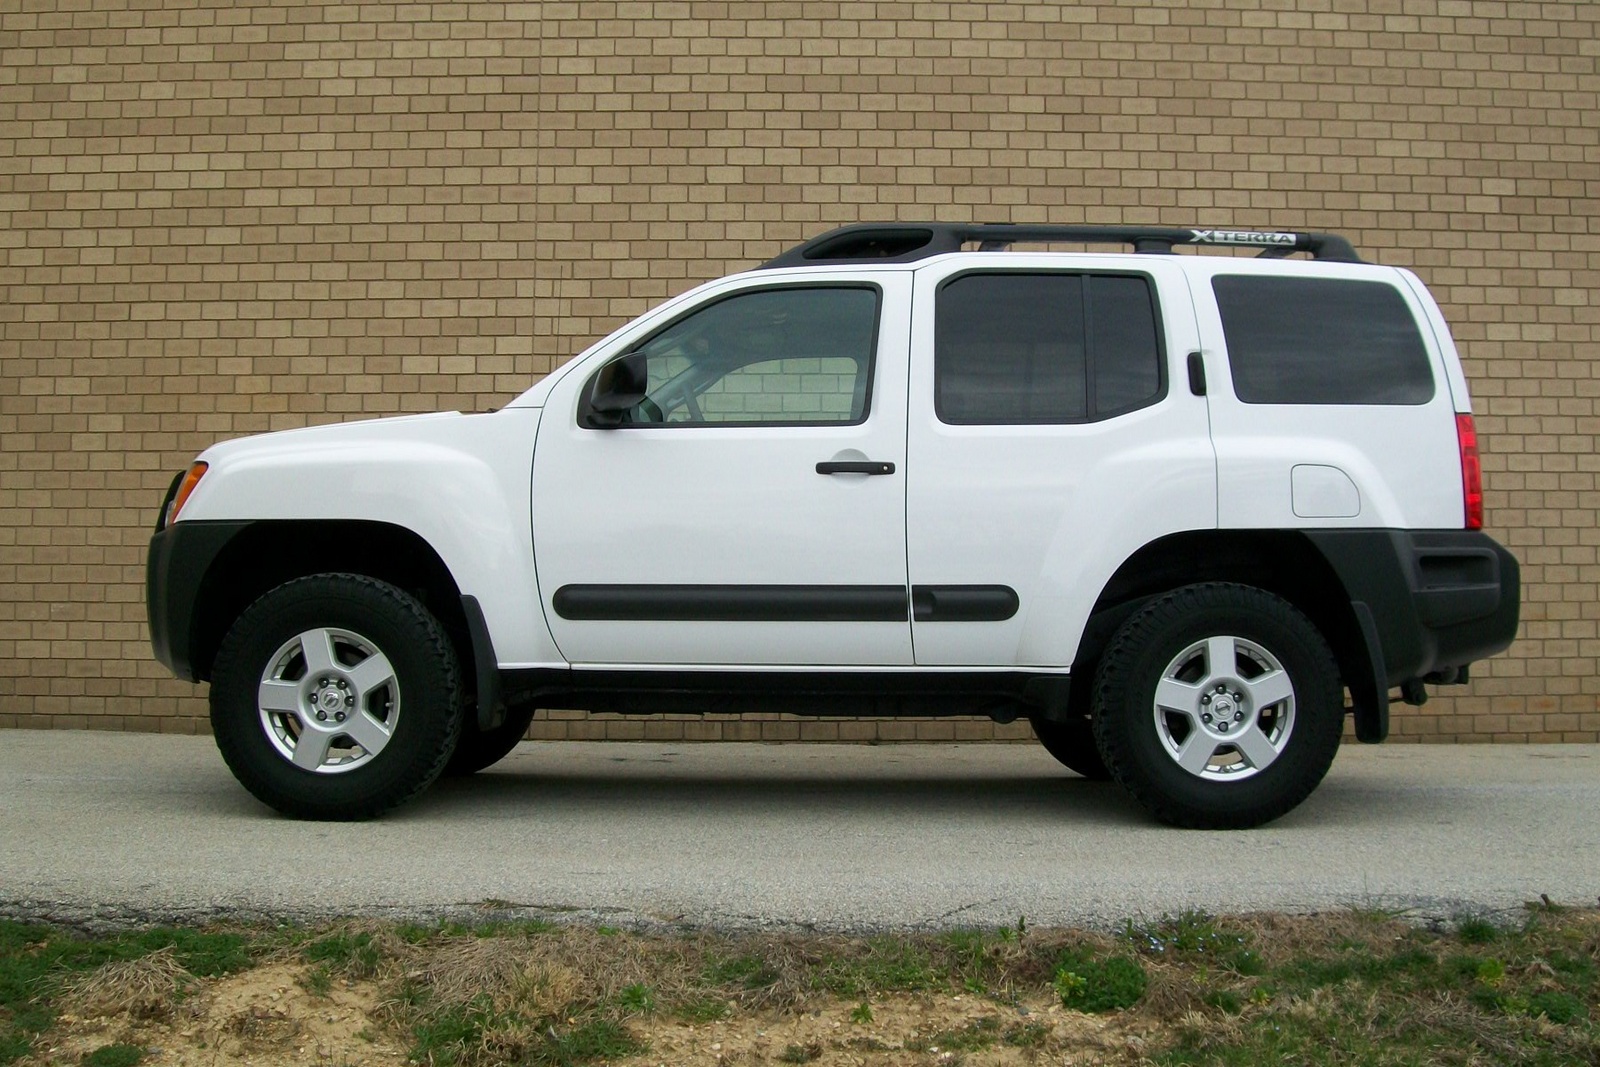 2006 Nissan xterra for sale in canada #5